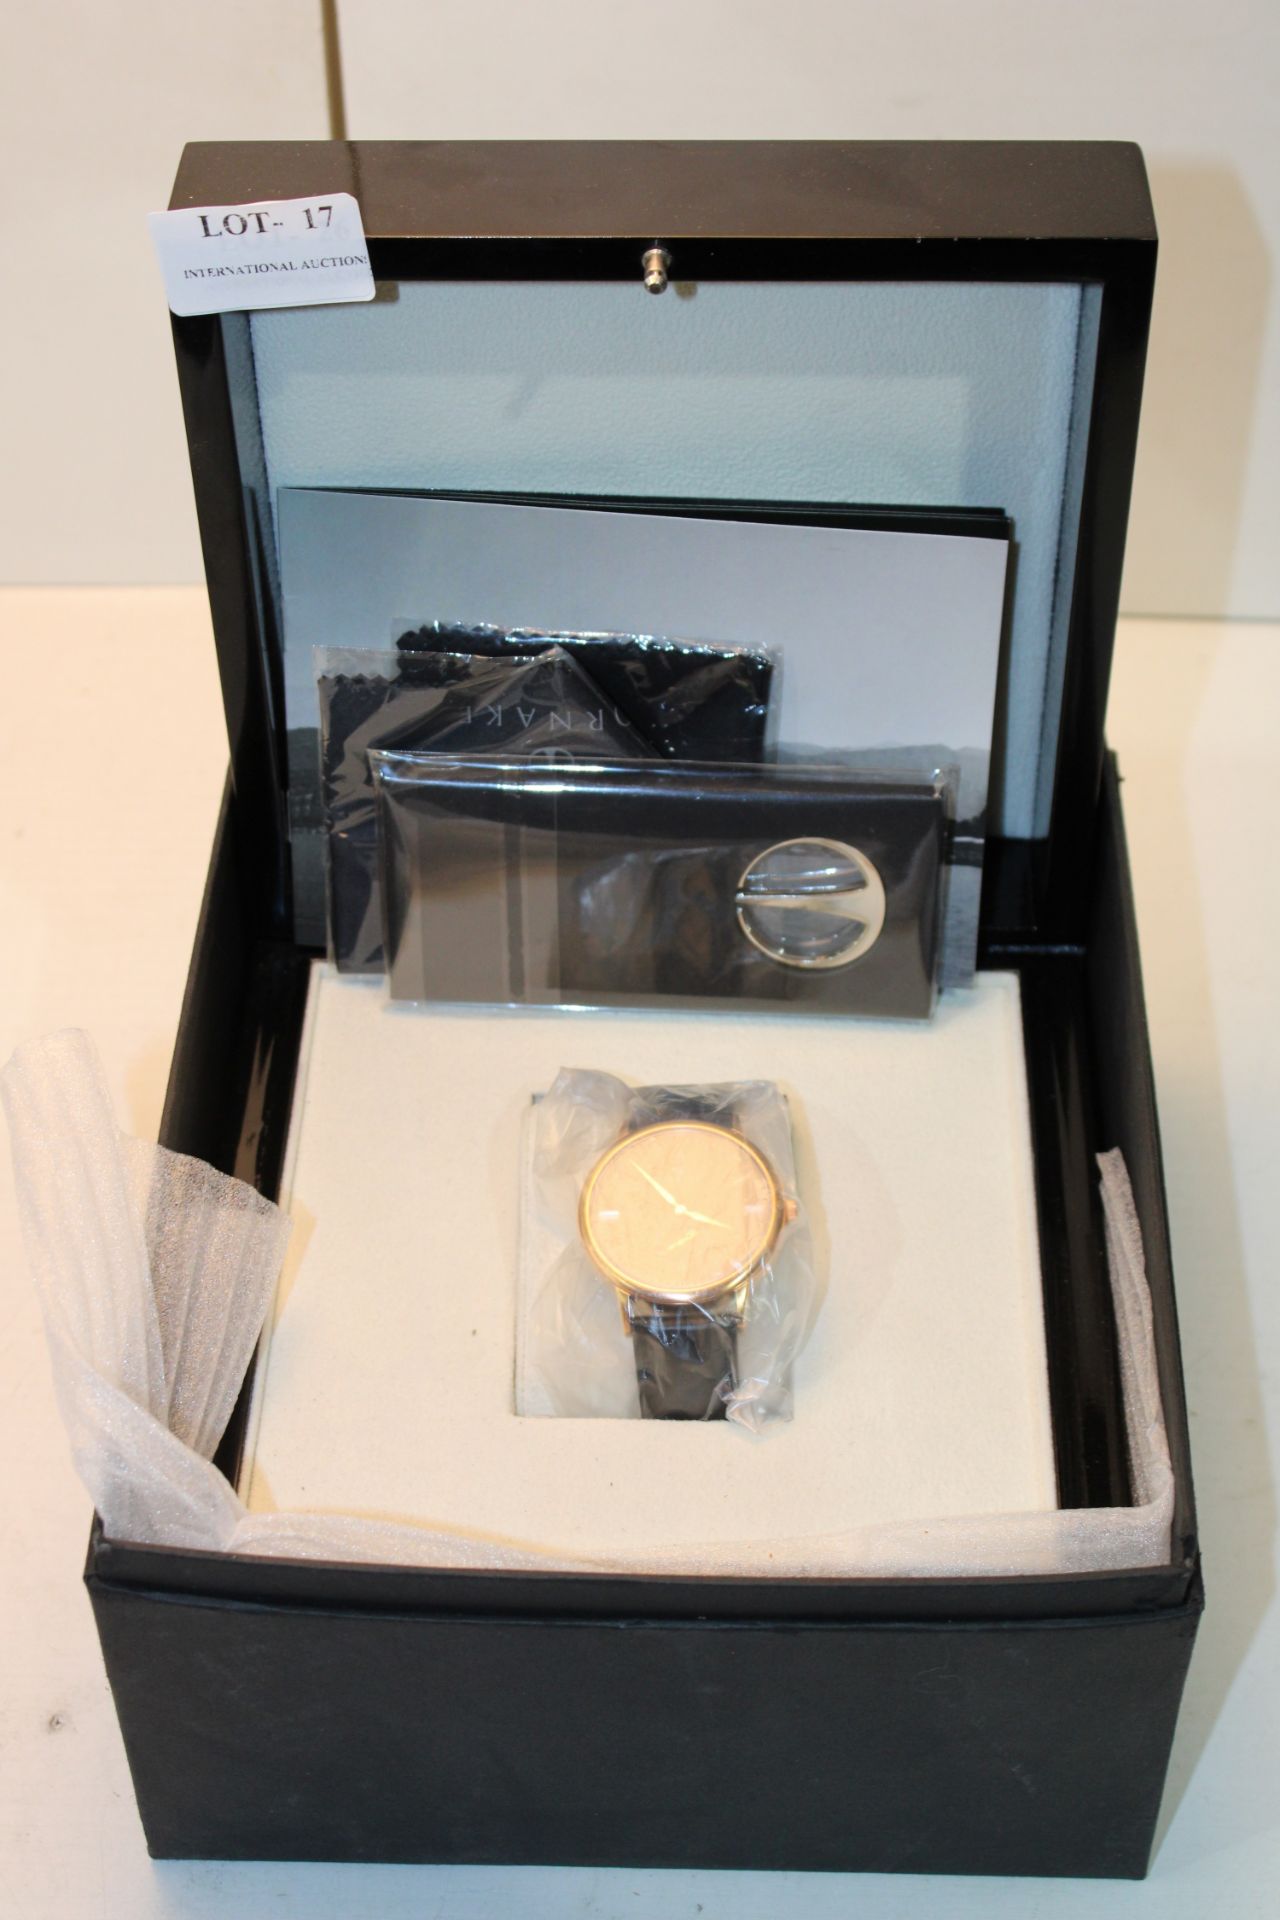 BOXED ORNAKE DESIGNER MENS WRIST WATCH CHROME TONE & BLACK LEATHER STRAP WITH HIGH GLOSS BLACK